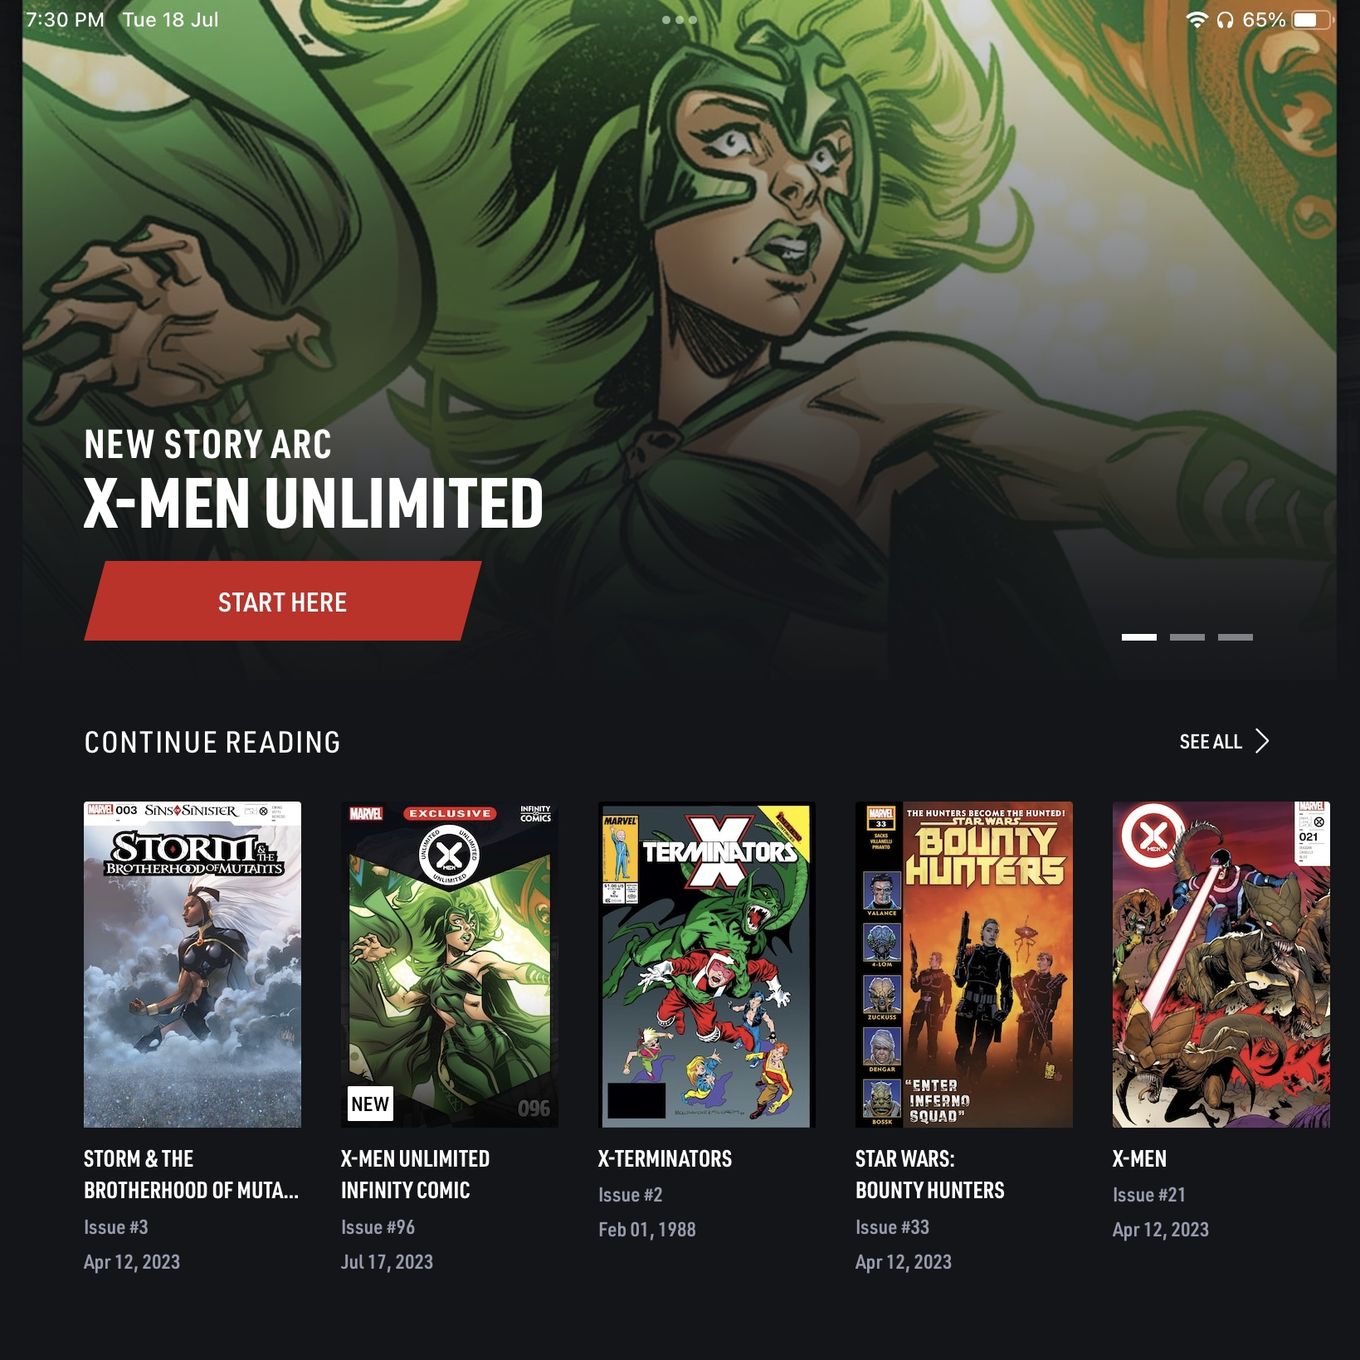 A screenshot of the the application, Marvel Unlimited showing the continue reading row.